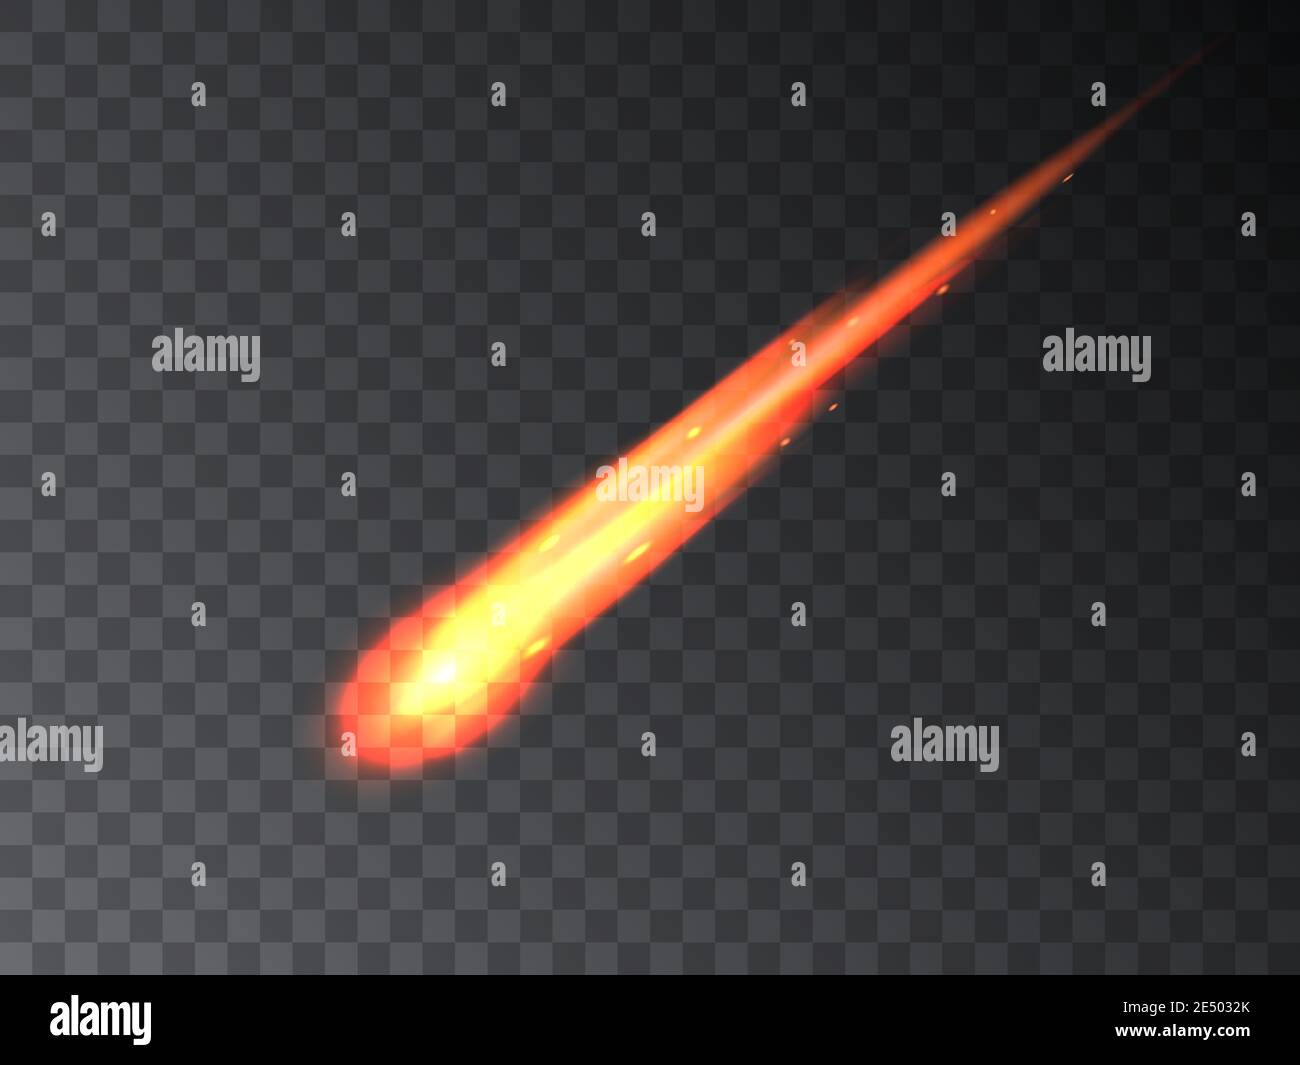 Falling fireball meteorite. Vector illustration of a burning falling fireball meteor, comet, meteorite, asteroid isolated on a transparent background. Stock Vector